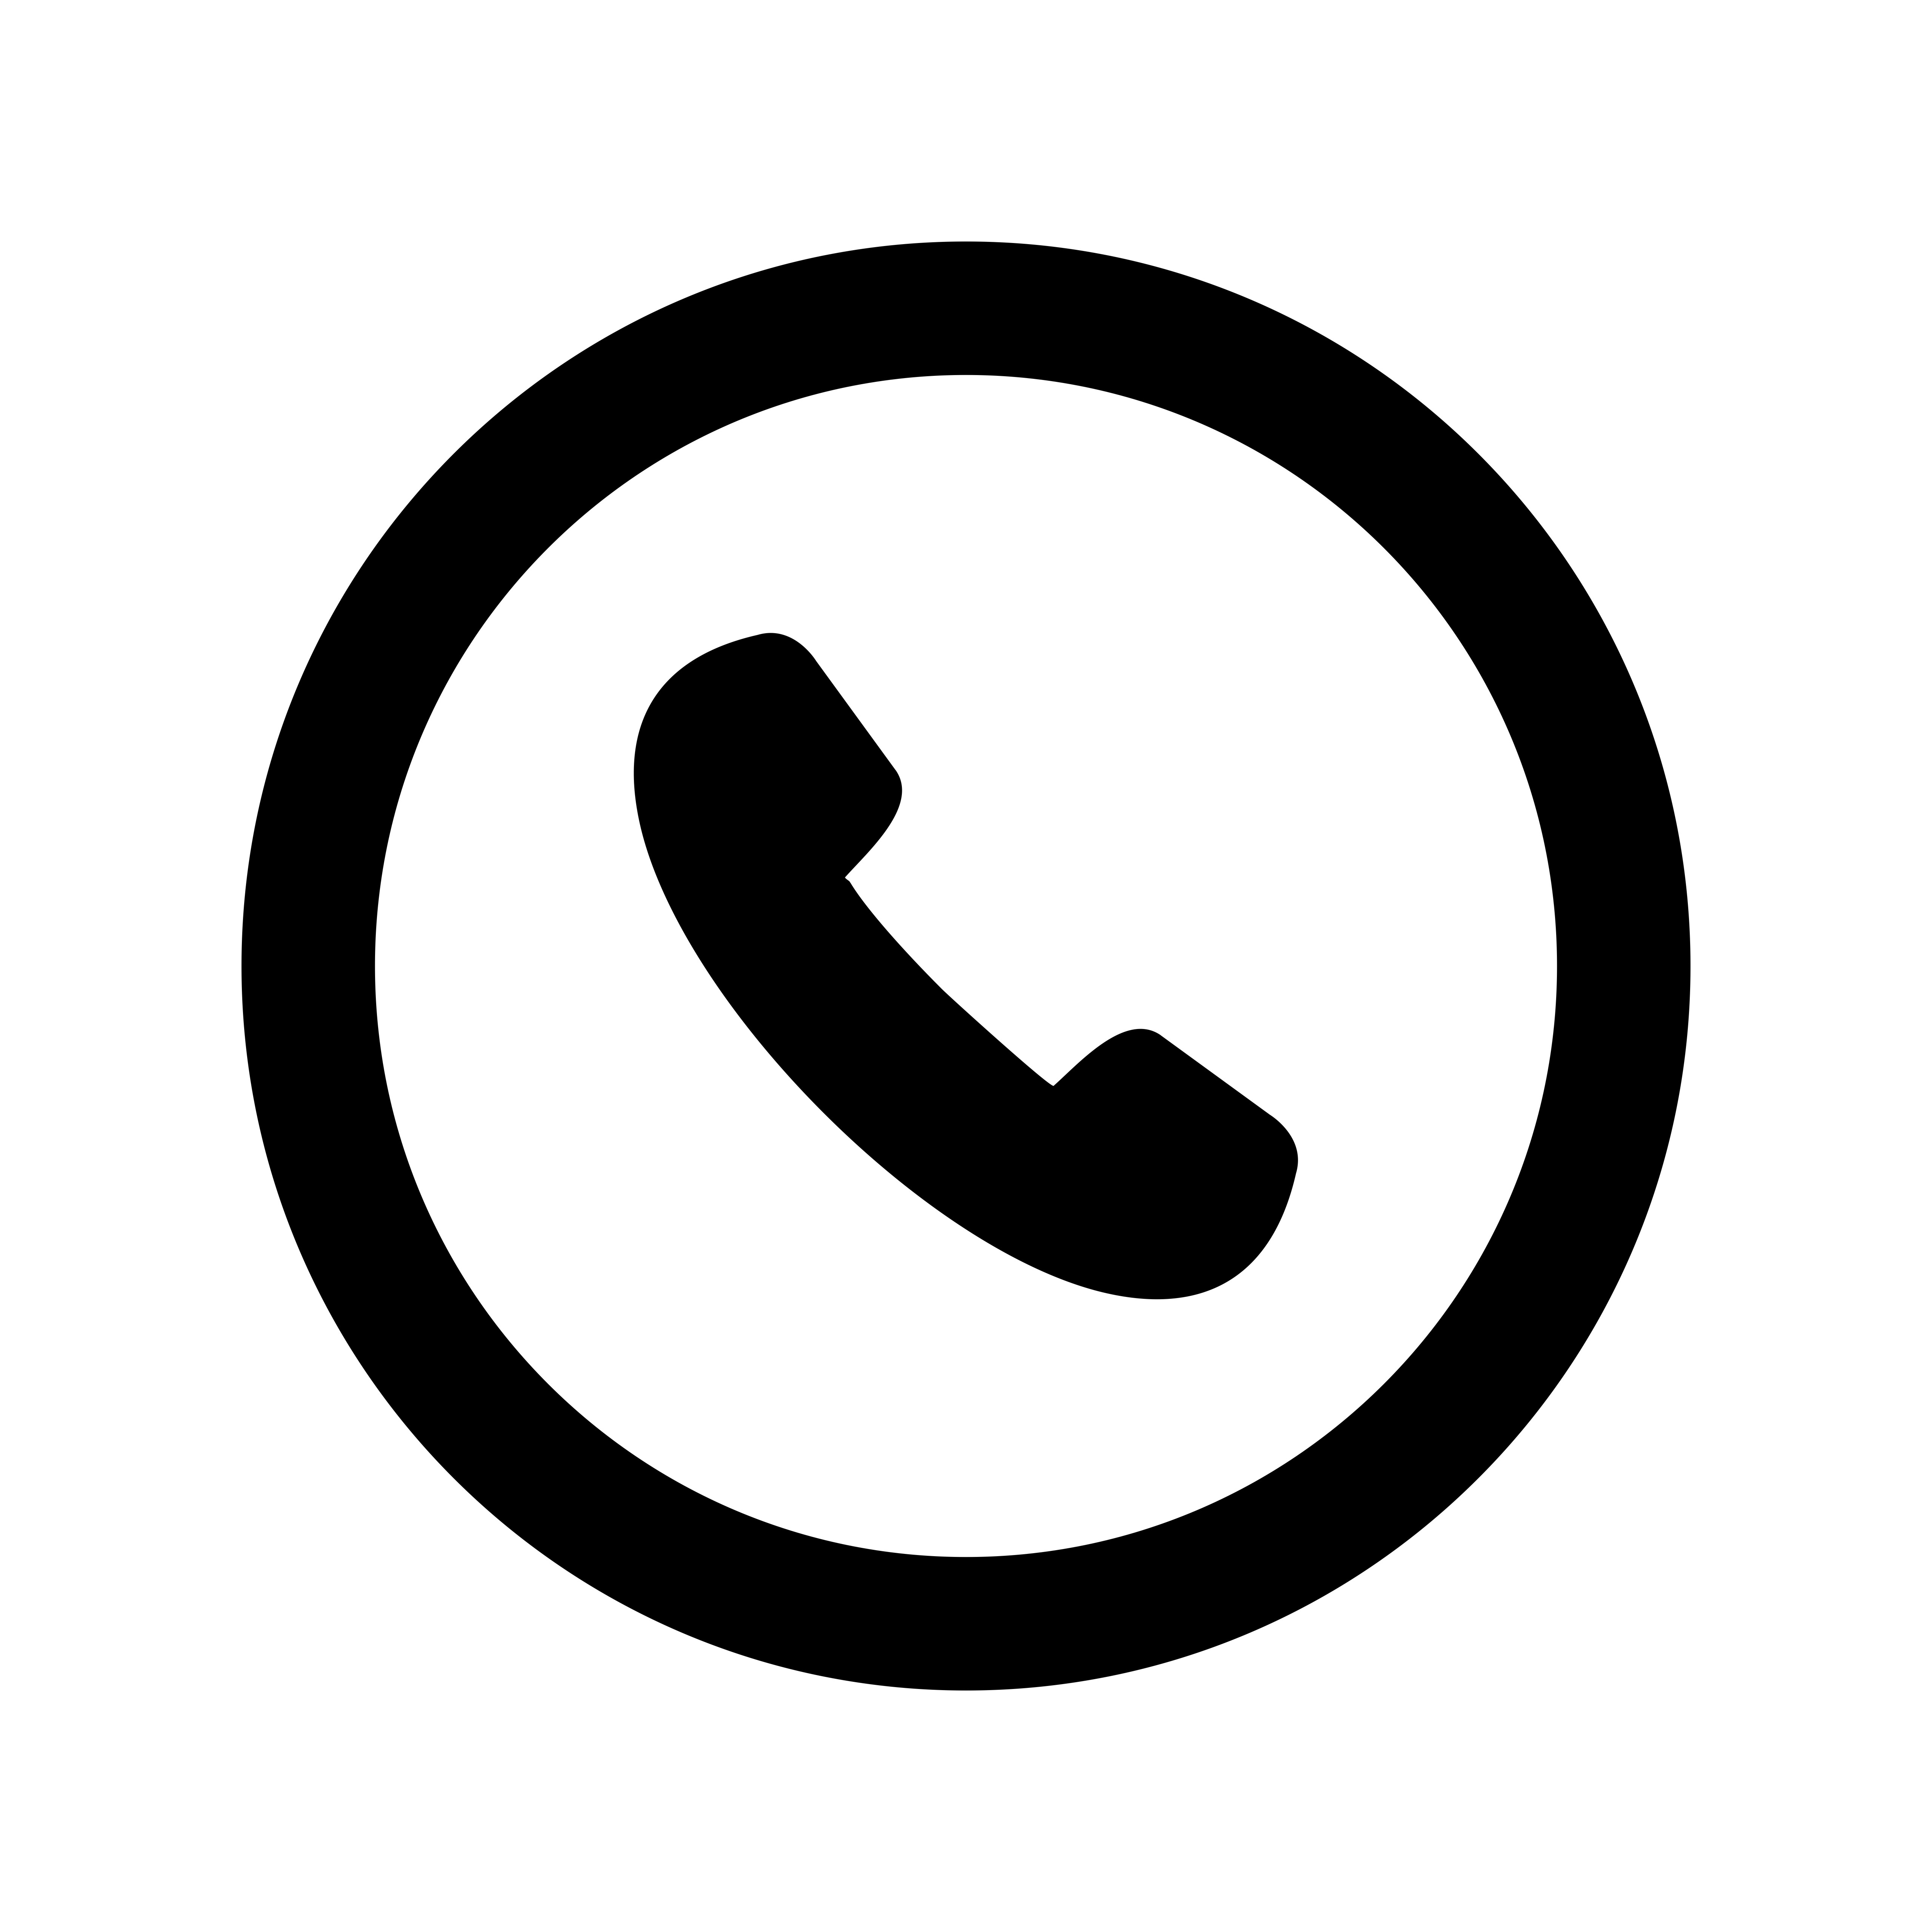 Icone Telephone Vector Art, Icons, and Graphics for Free Download